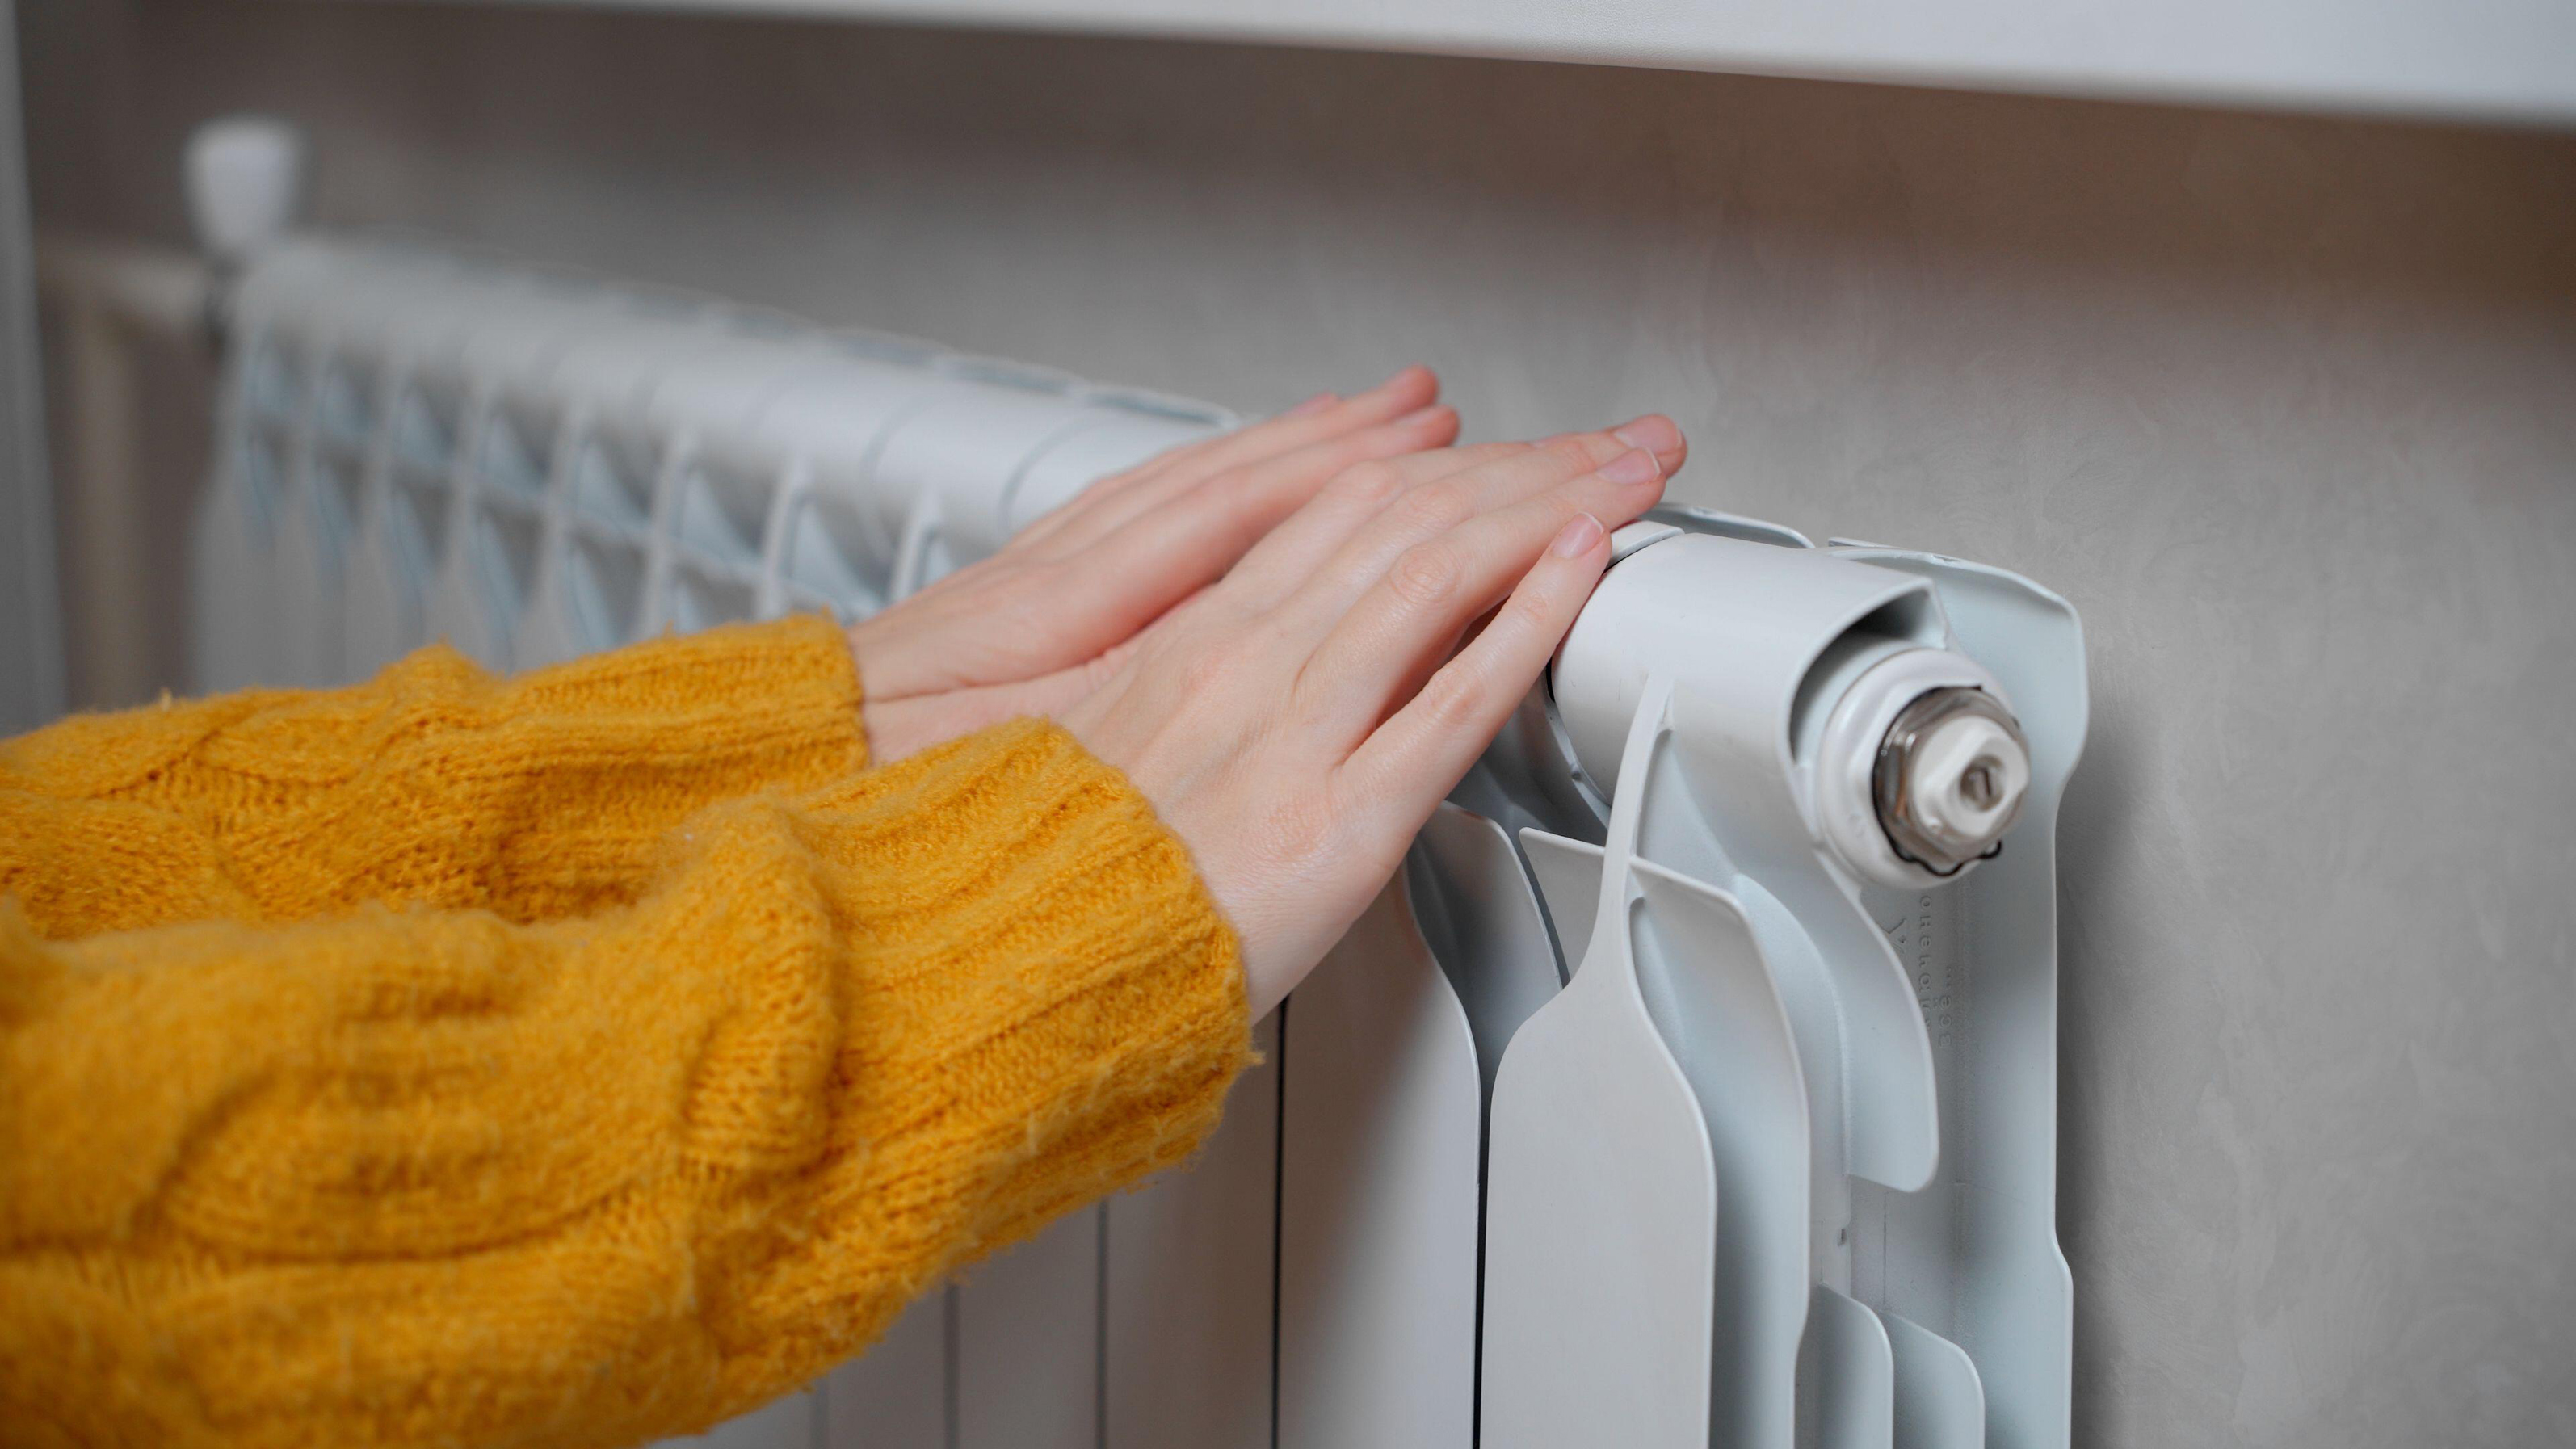 Woman touching radiator to see if it's warm